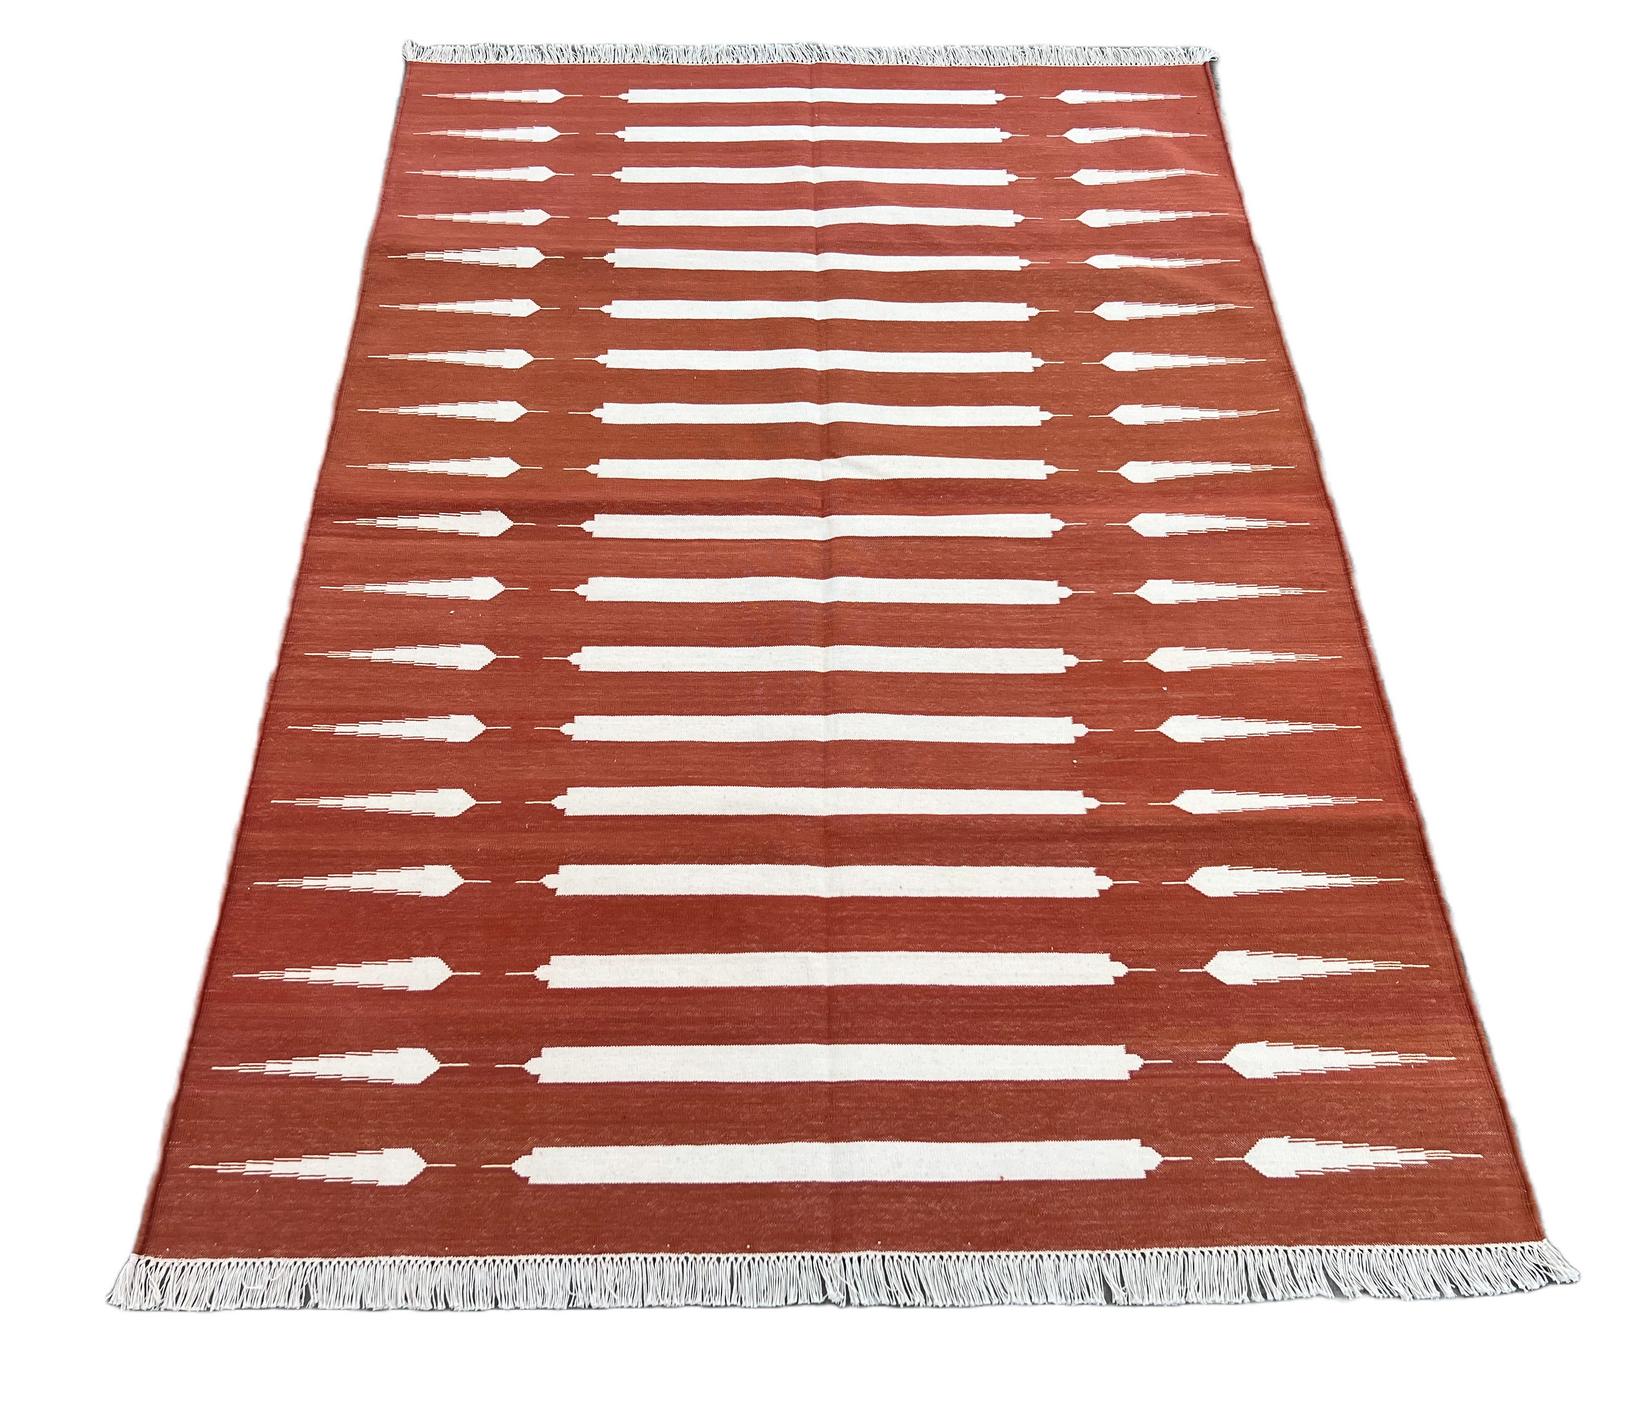 Handmade Cotton Area Flat Weave Rug, 4x6 Tan And White Striped Indian Dhurrie For Sale 1